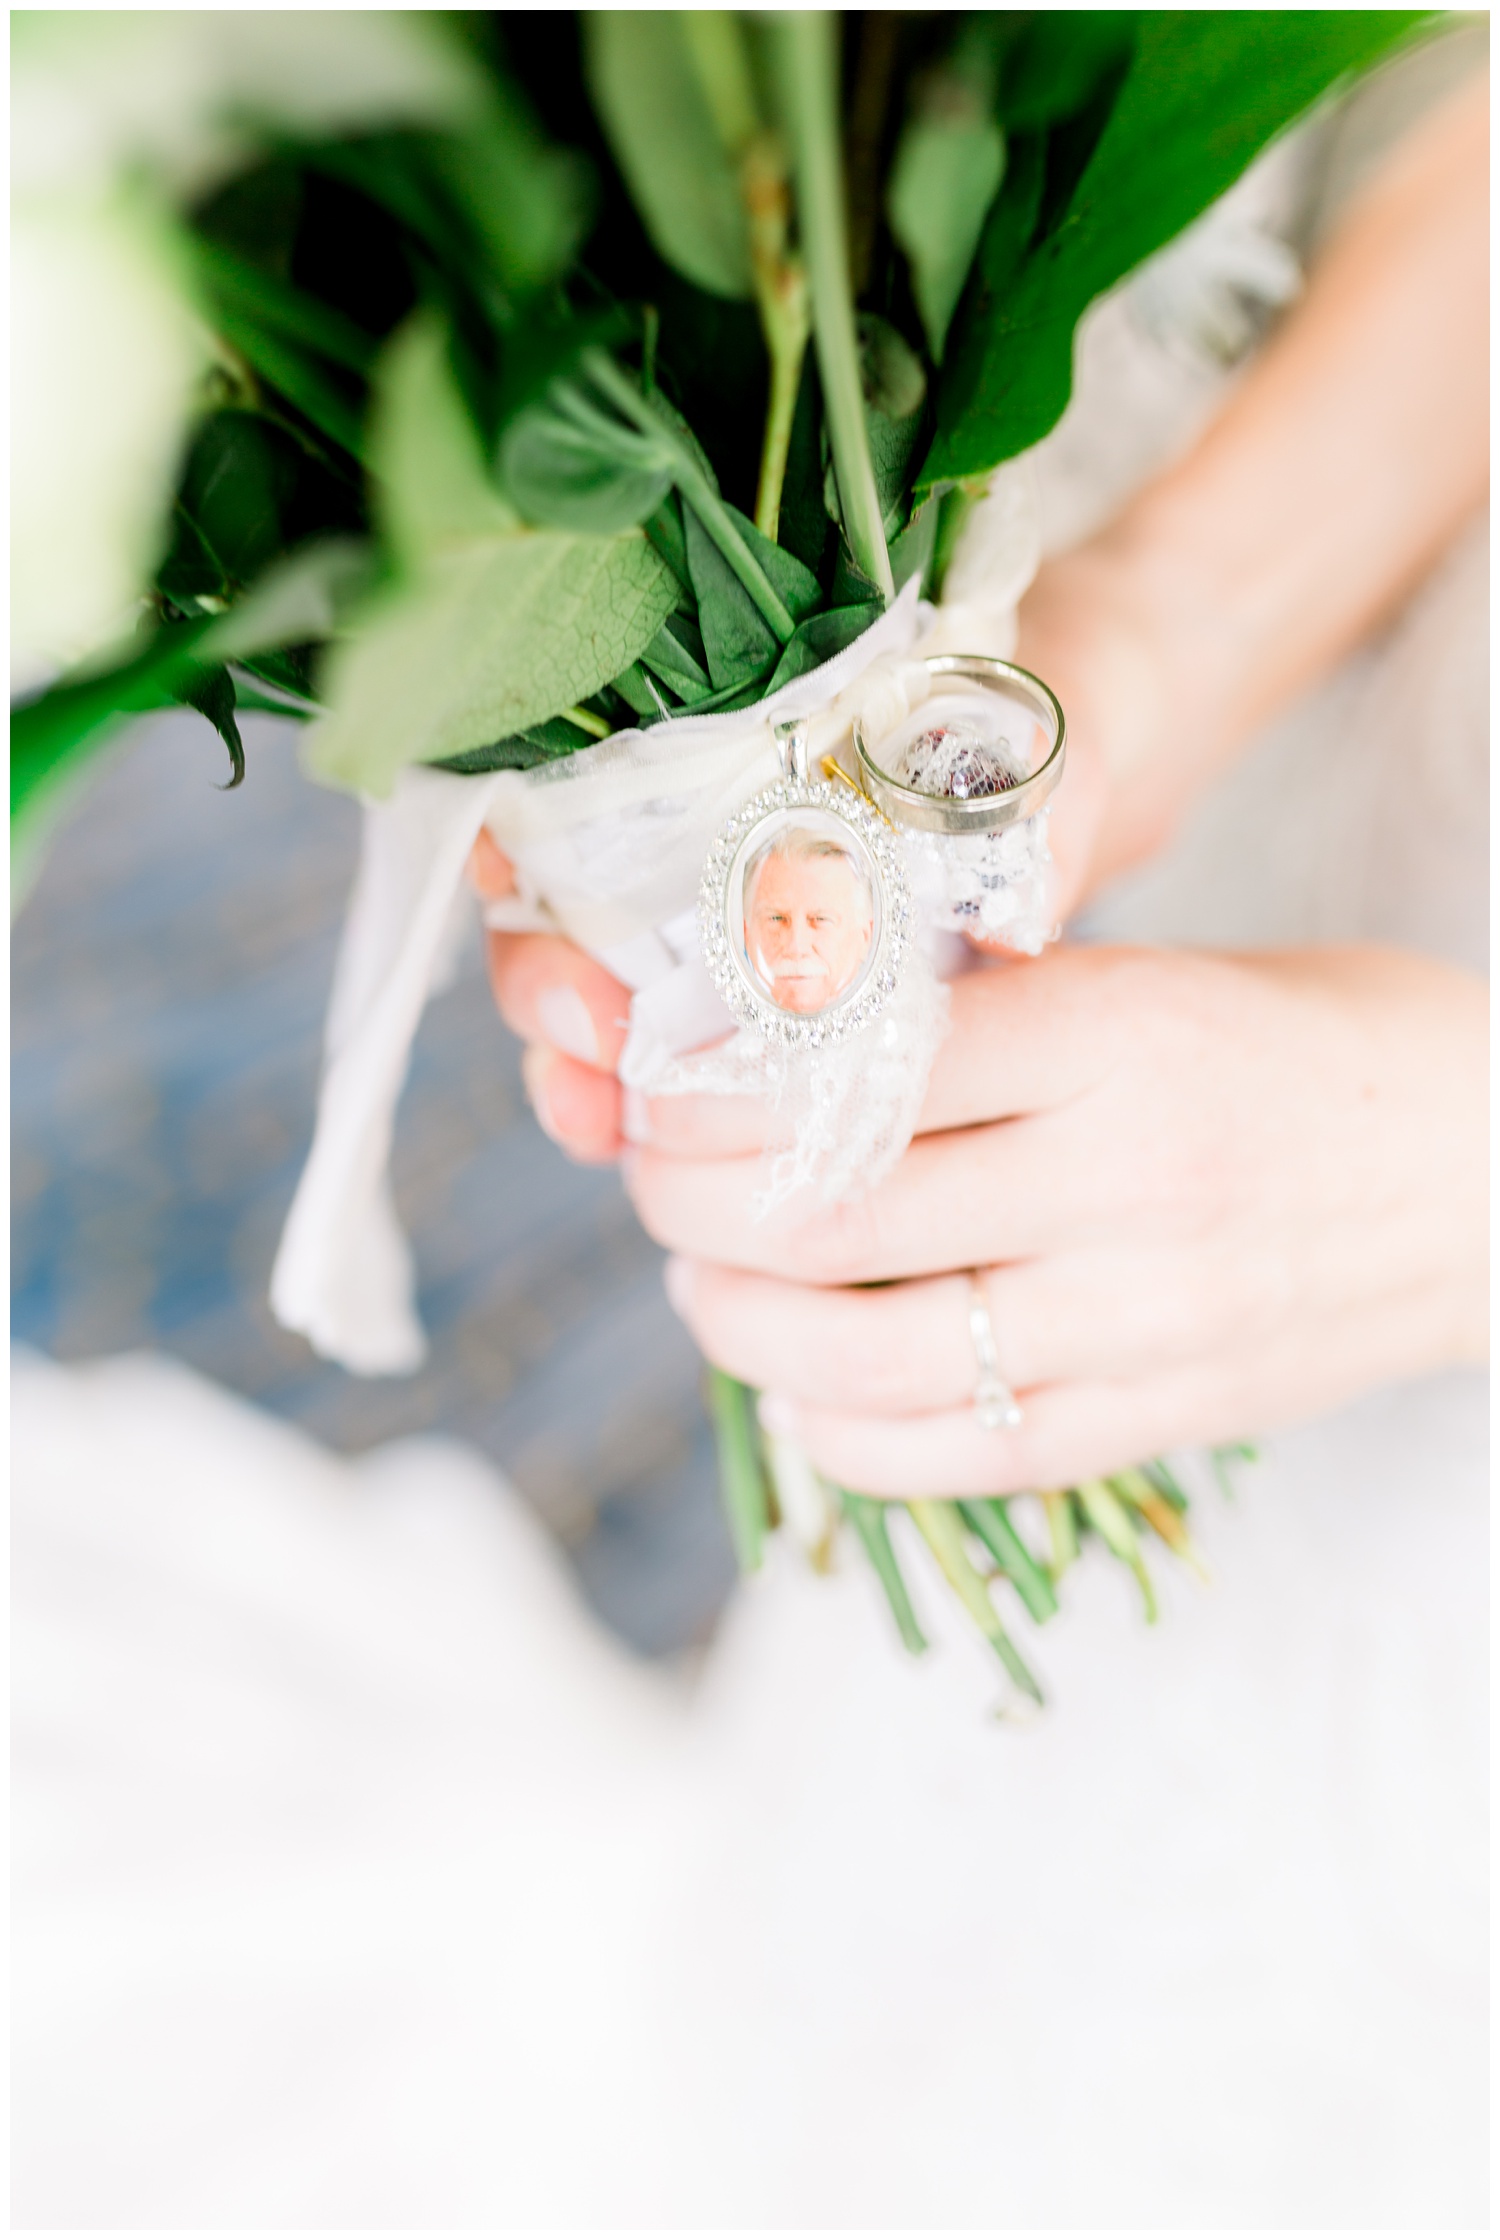 Incorporating family heirlooms into your wedding